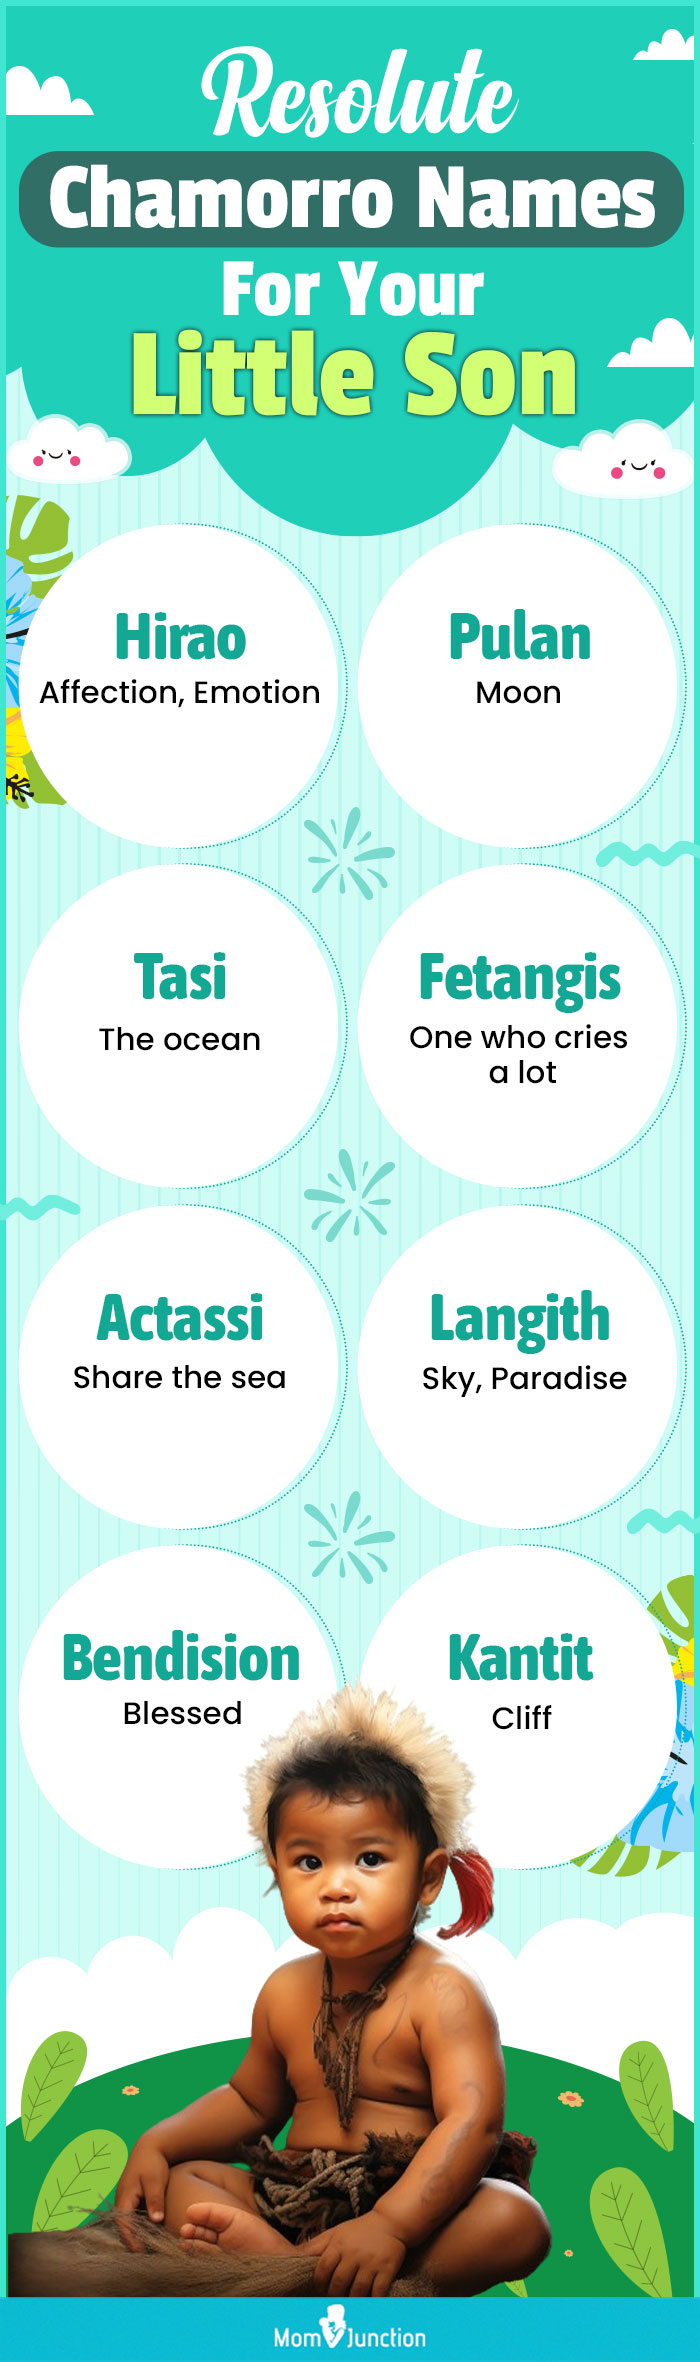 resolute chamorro names for your little son (infographic)